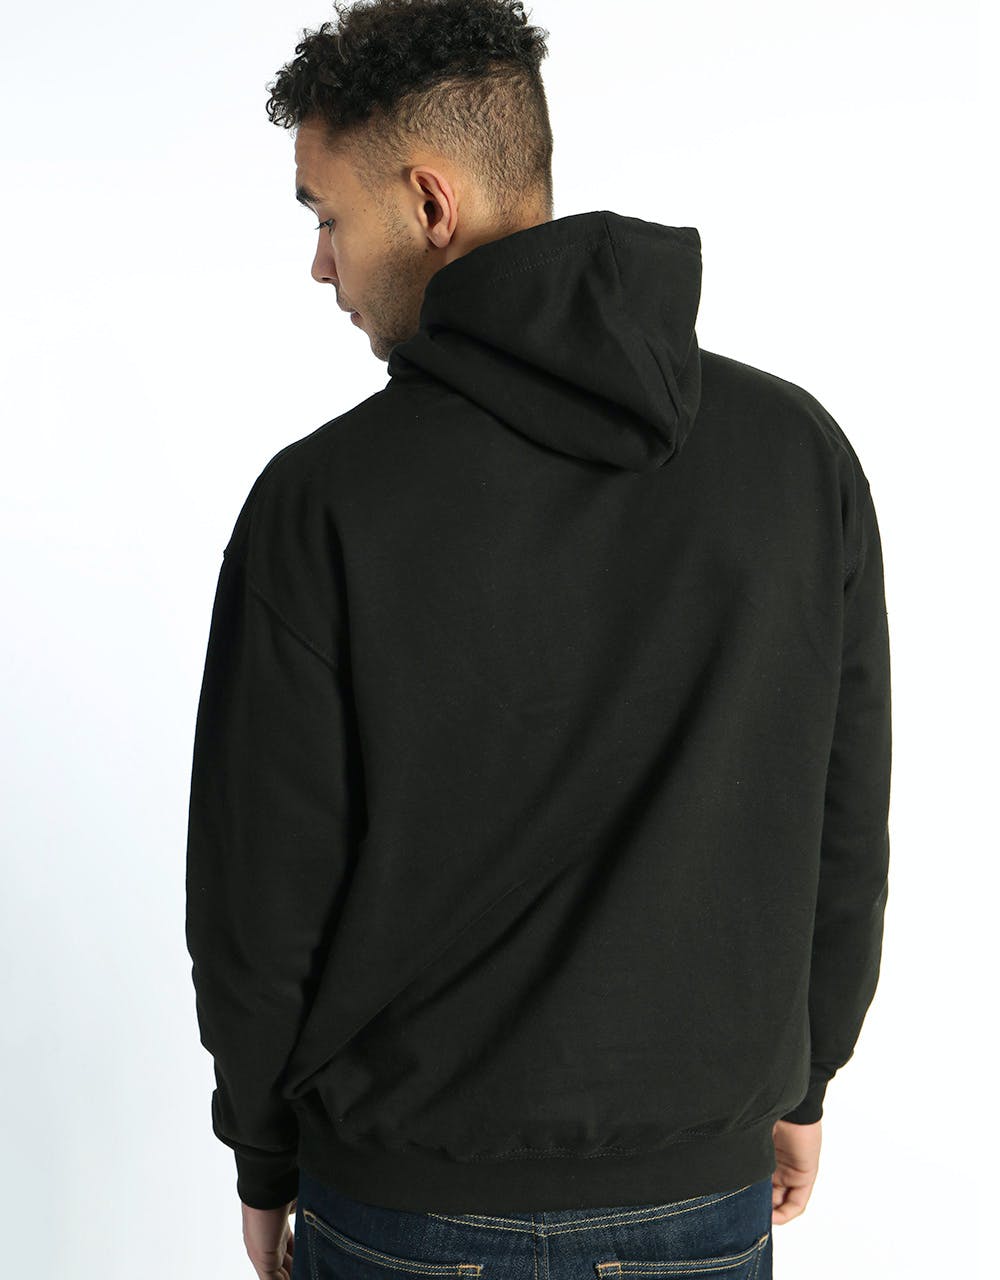 Route One The End Pullover Hoodie - Black